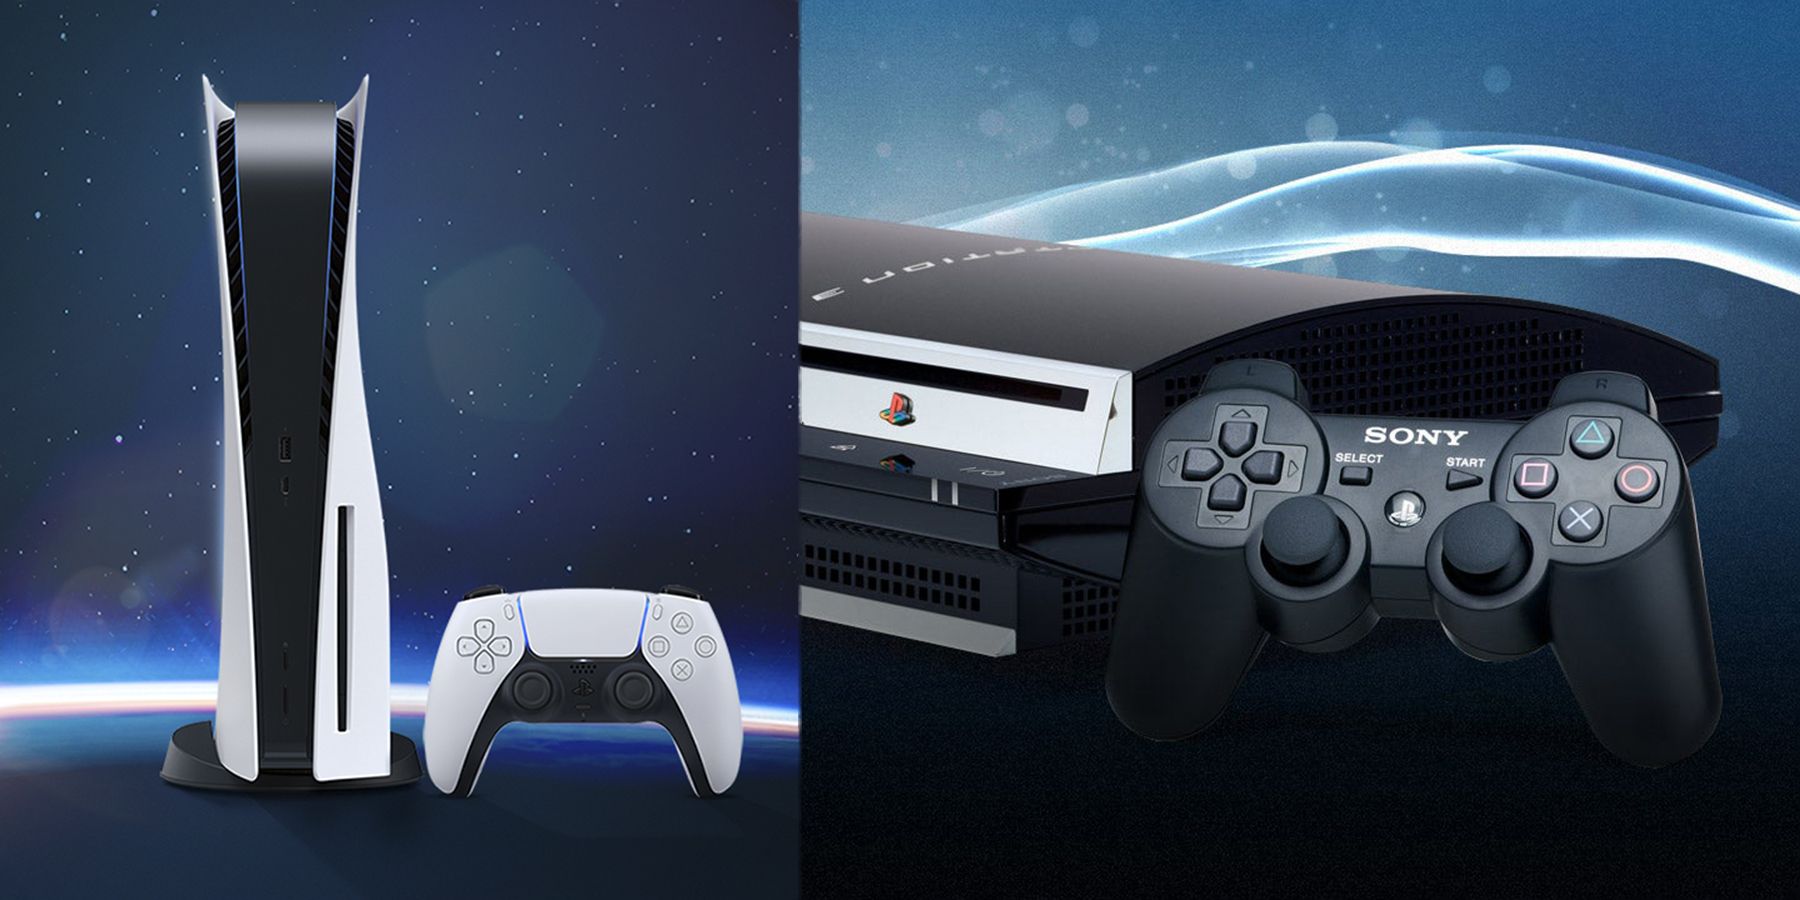 The team behind the biggest PS3 emulator is now tackling the PS4